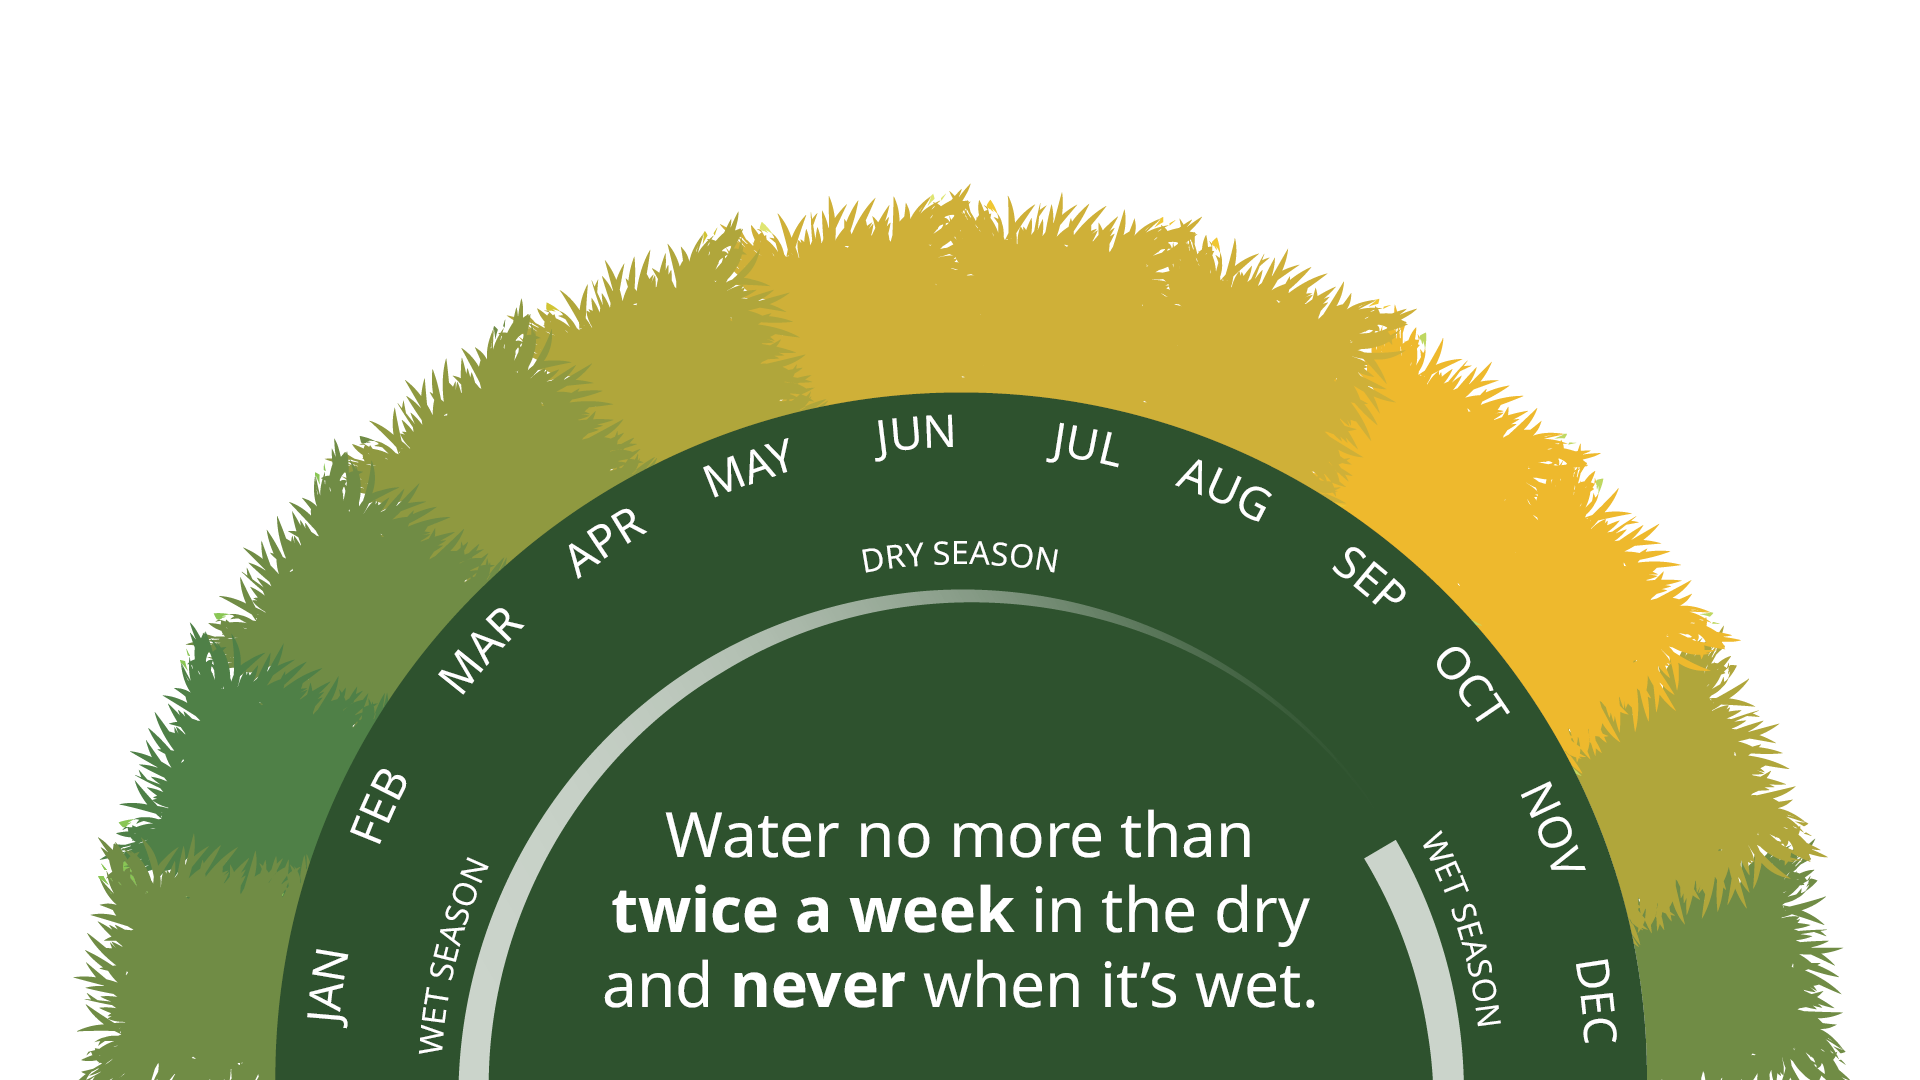 Calendar showing water no more than twice in the dry and never when it's wet